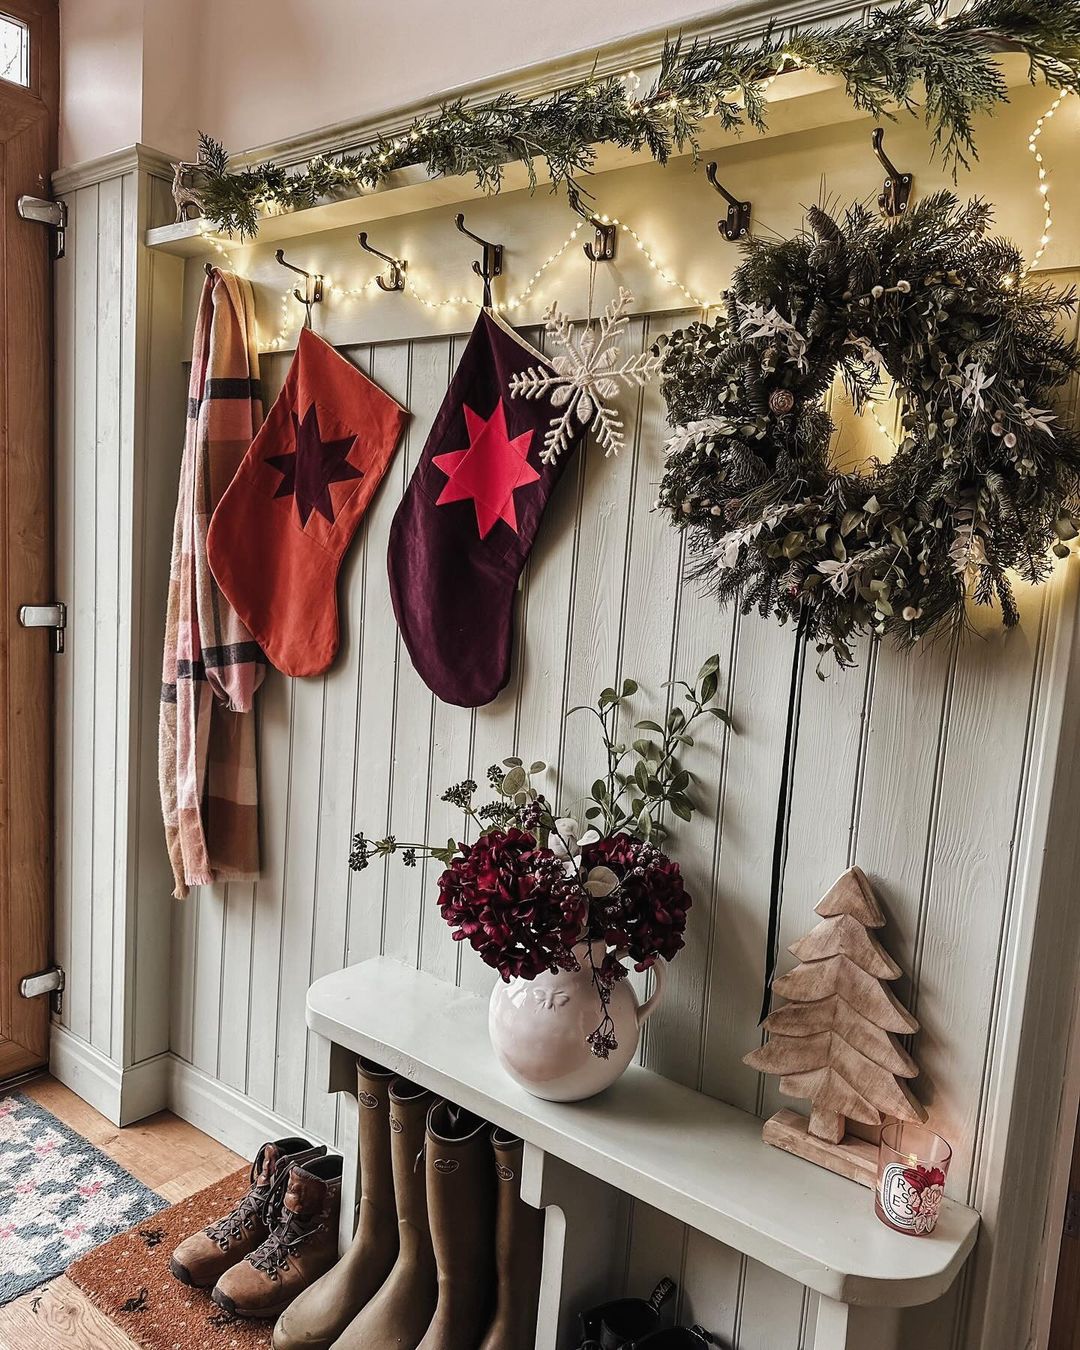 Decorate an Entryway with Stockings